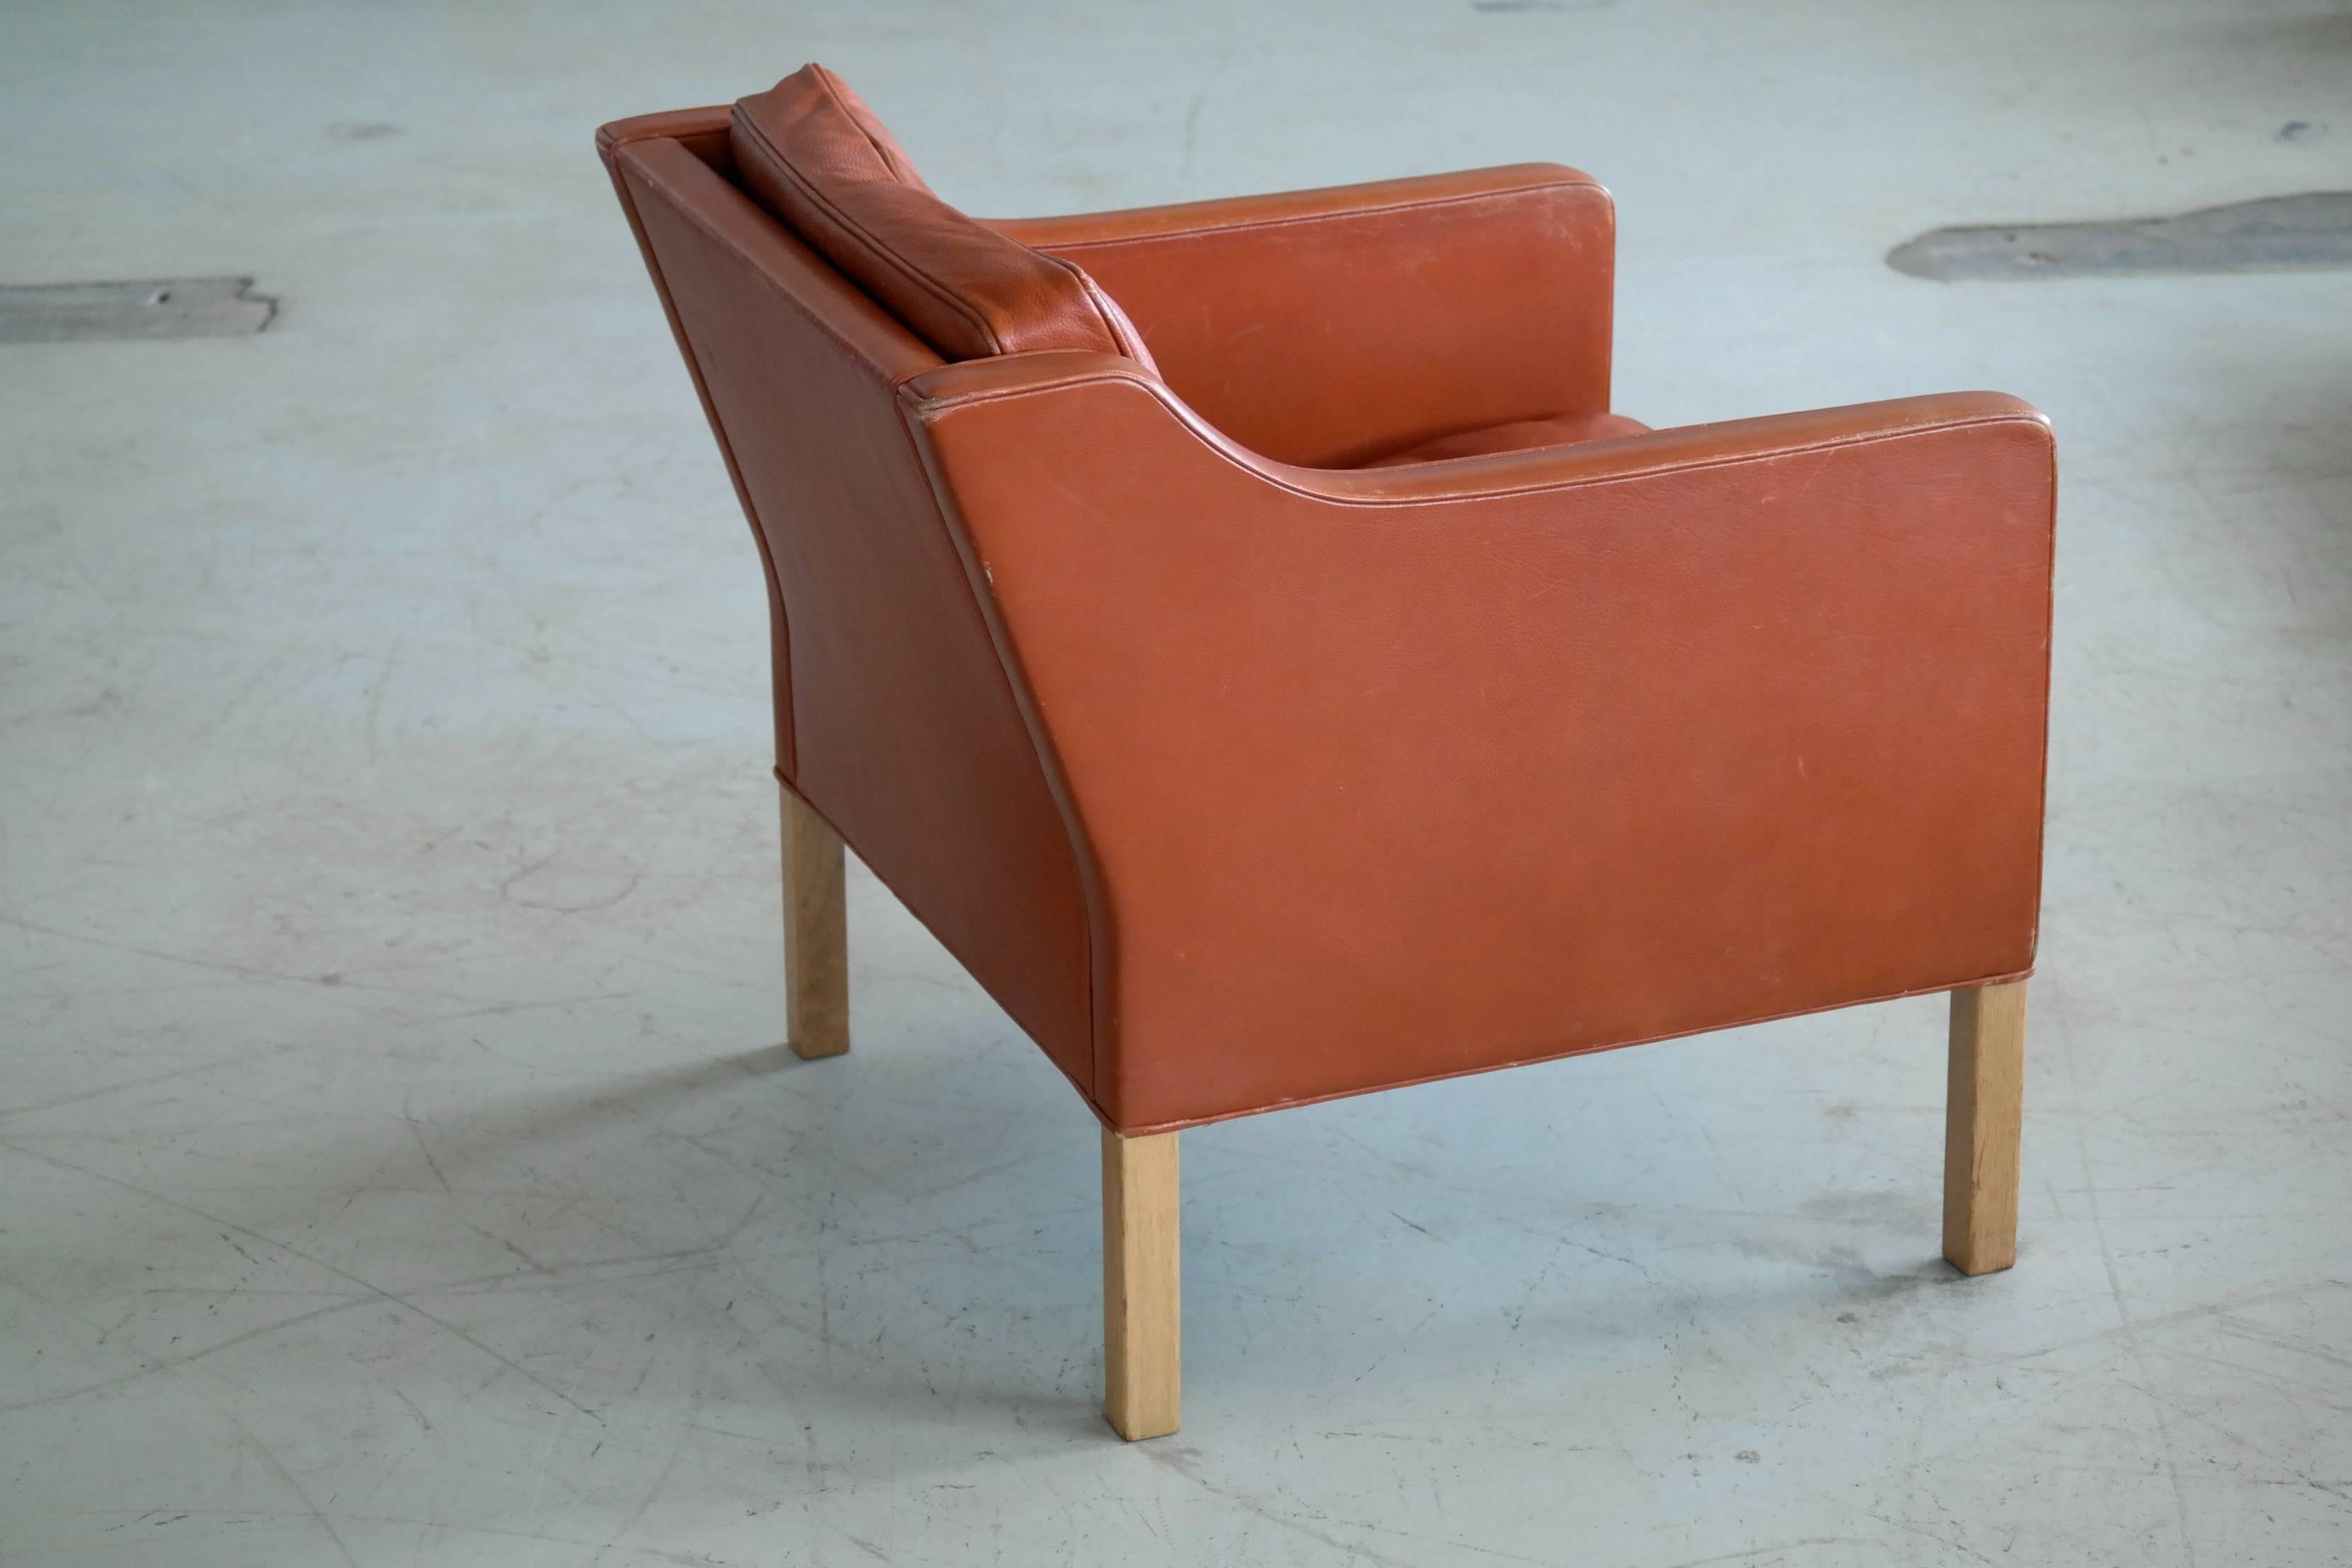 Mid-20th Century Børge Mogensen Lounge Chair Model 2421 in Down Filled Cognac Colored Leather